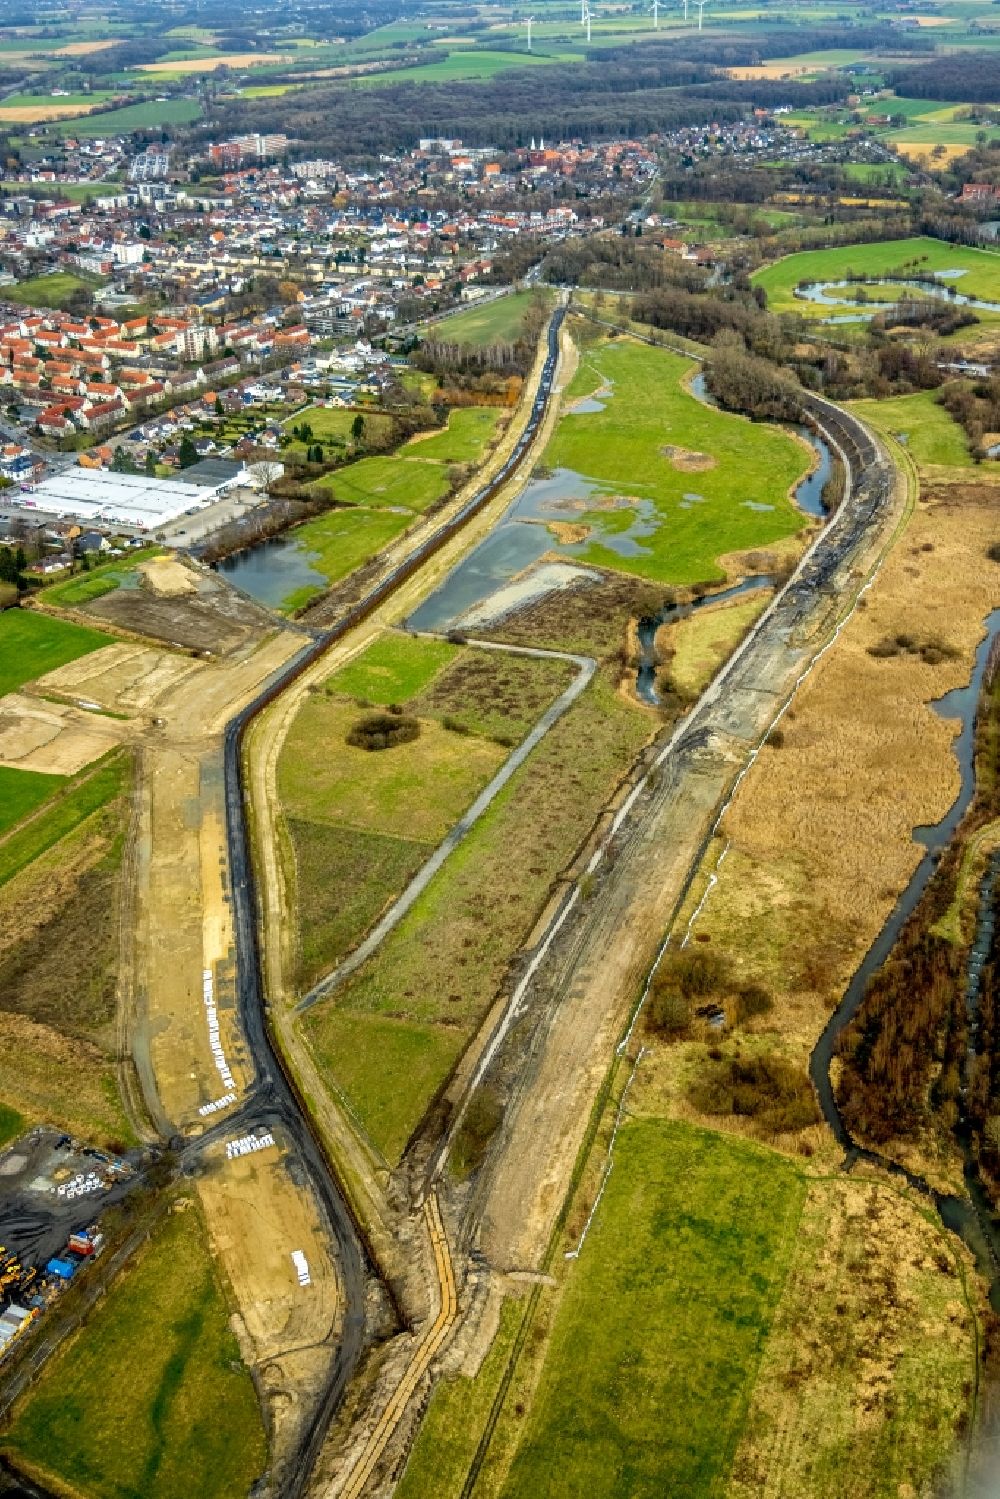 Aerial photograph Heessen - Riparian areas and flooded flood meadows due to a river bed leading to flood levels Lippe in Heessen at Ruhrgebiet in the state North Rhine-Westphalia, Germany